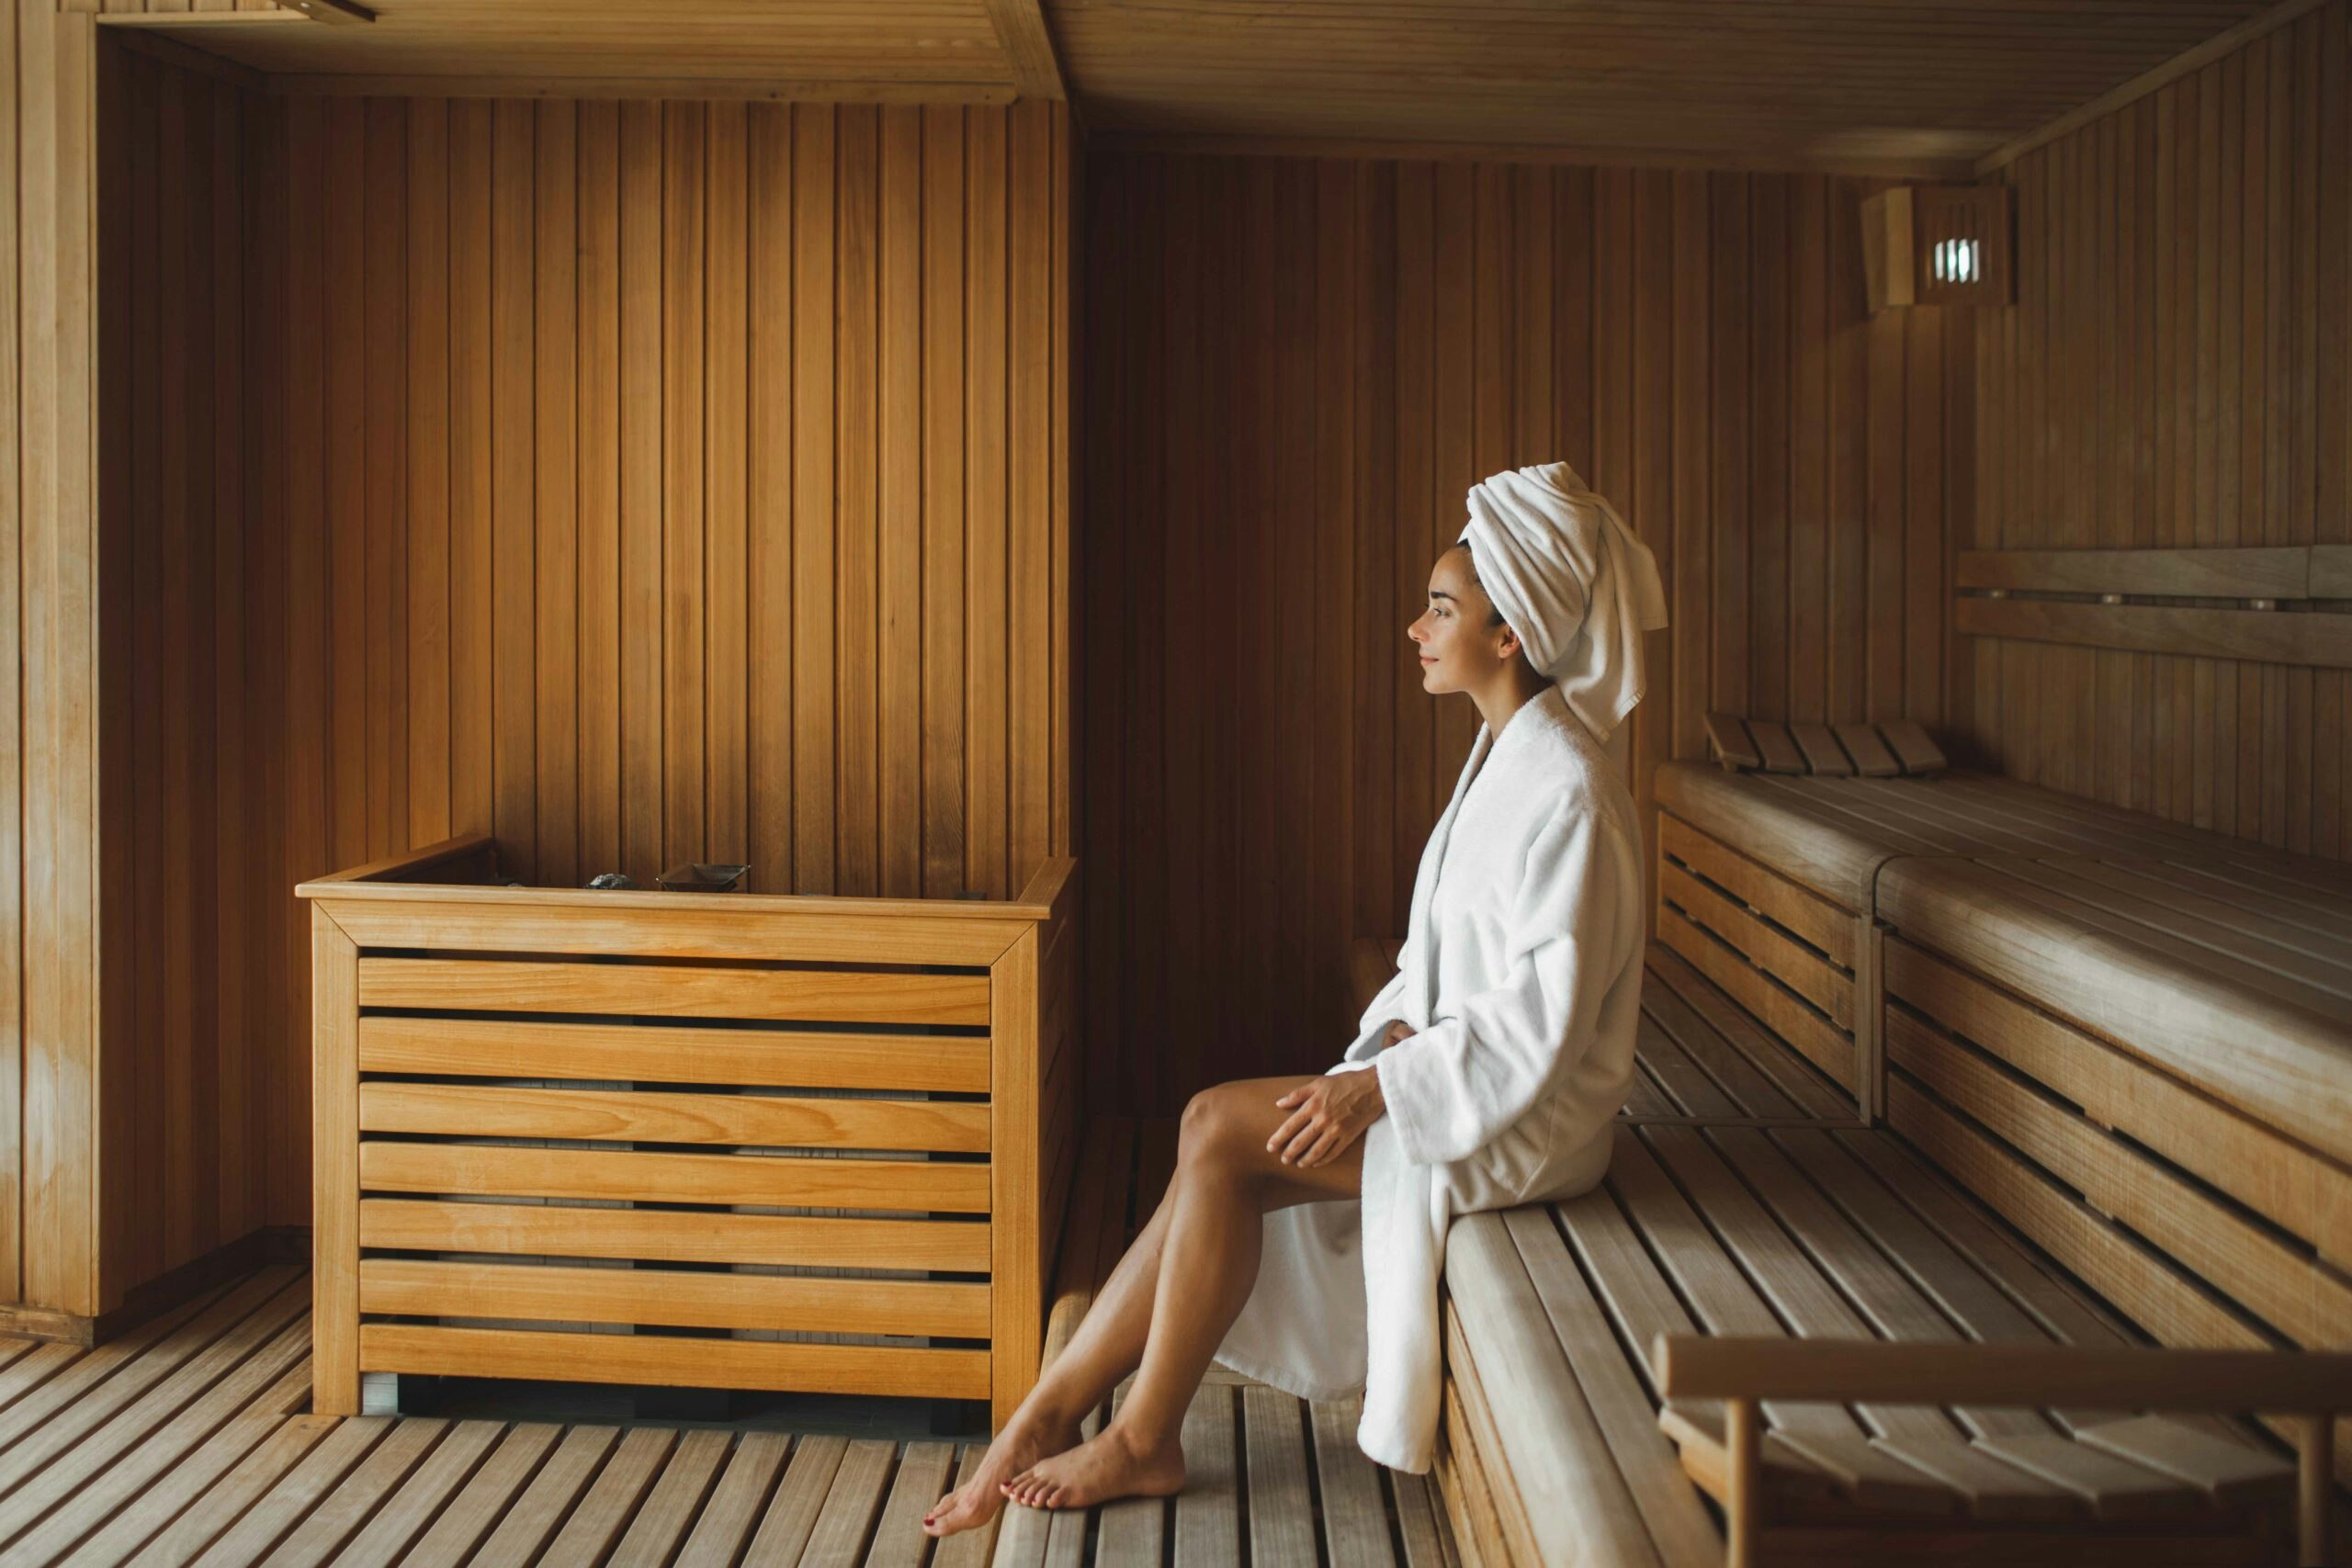 Steam Room vs. Sauna: Differences, Health Benefits and More